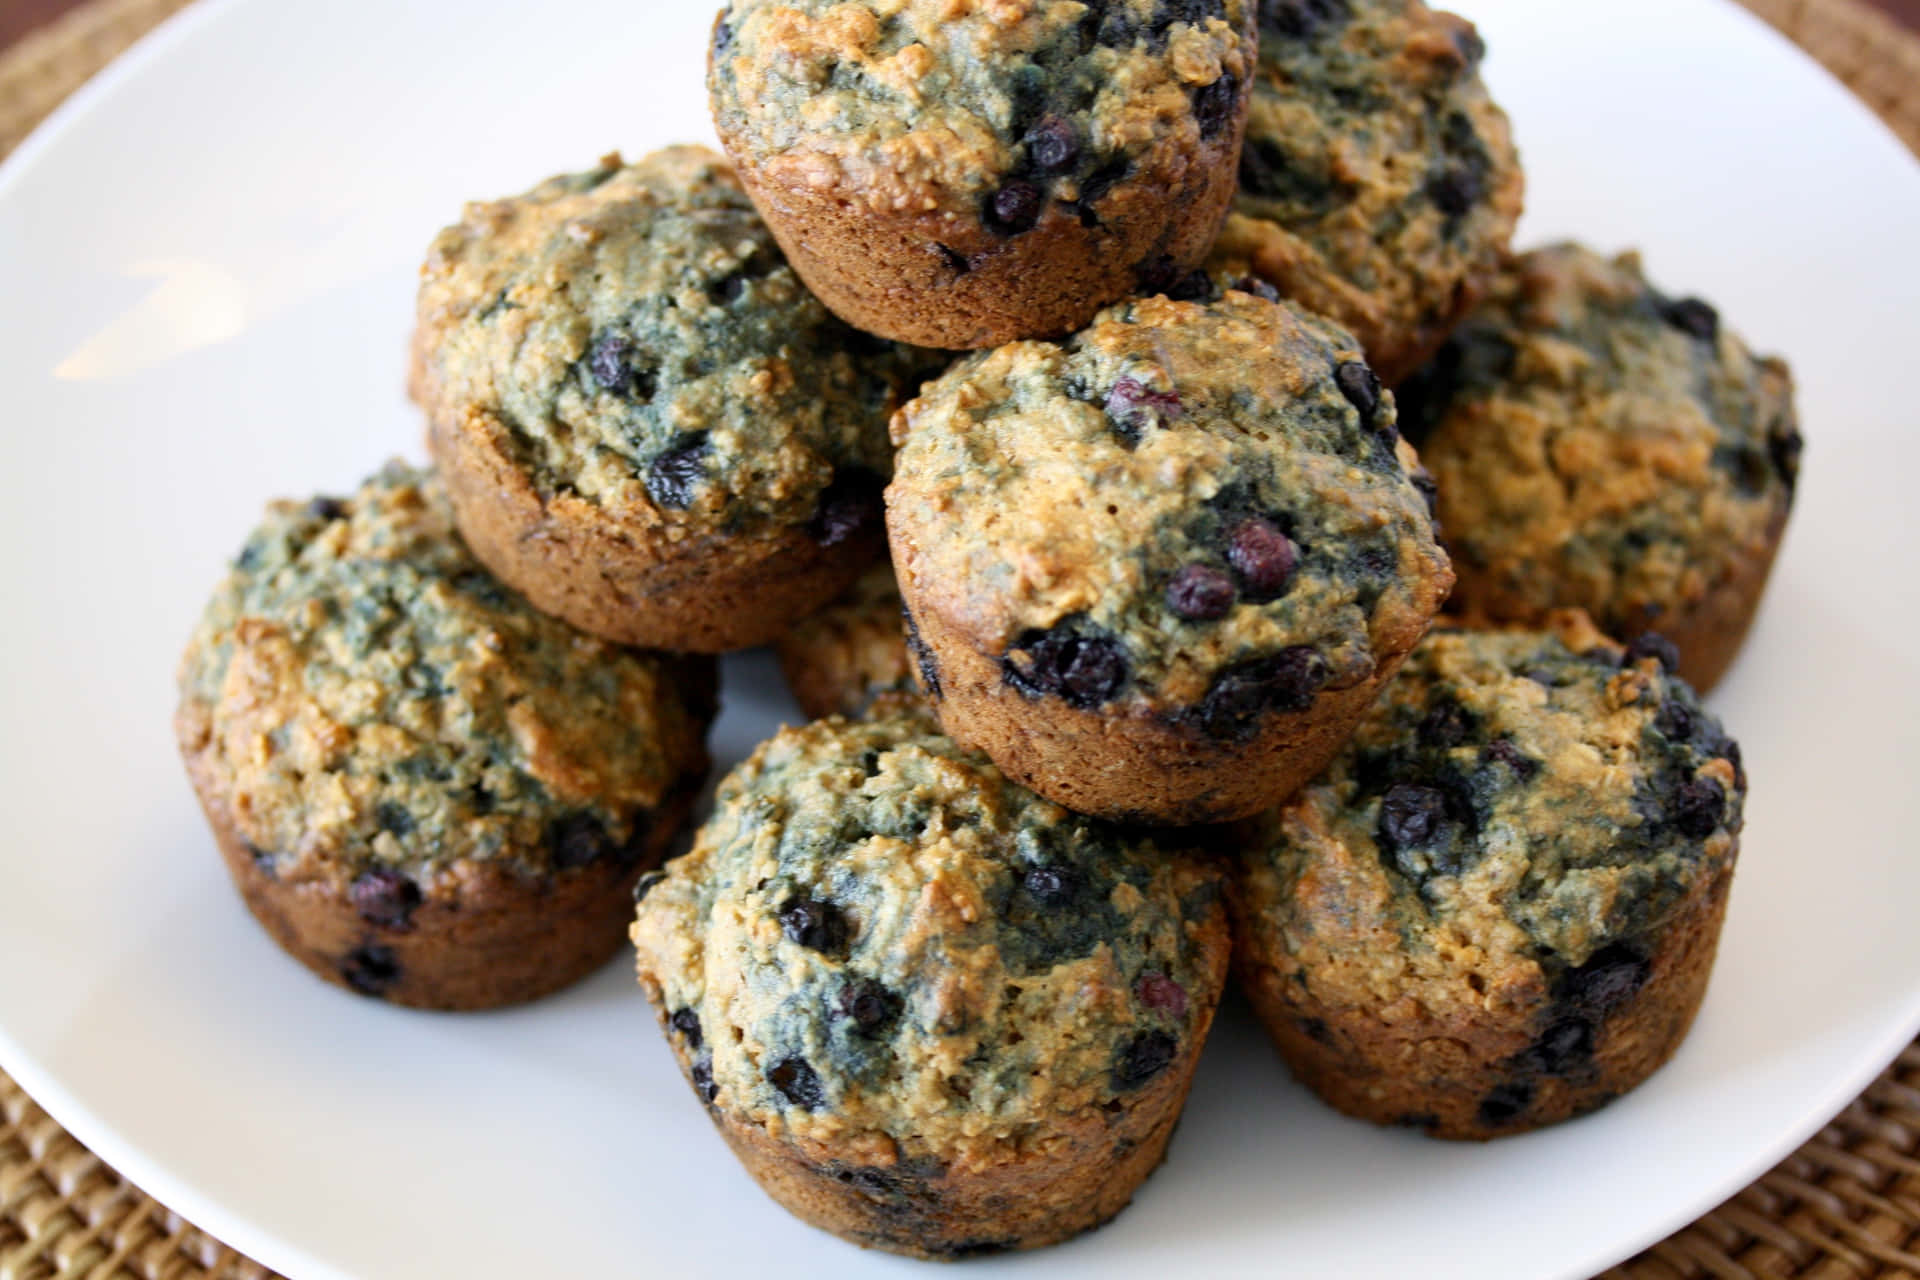 Enjoy a delicious and nutritious Blueberry Muffin Wallpaper